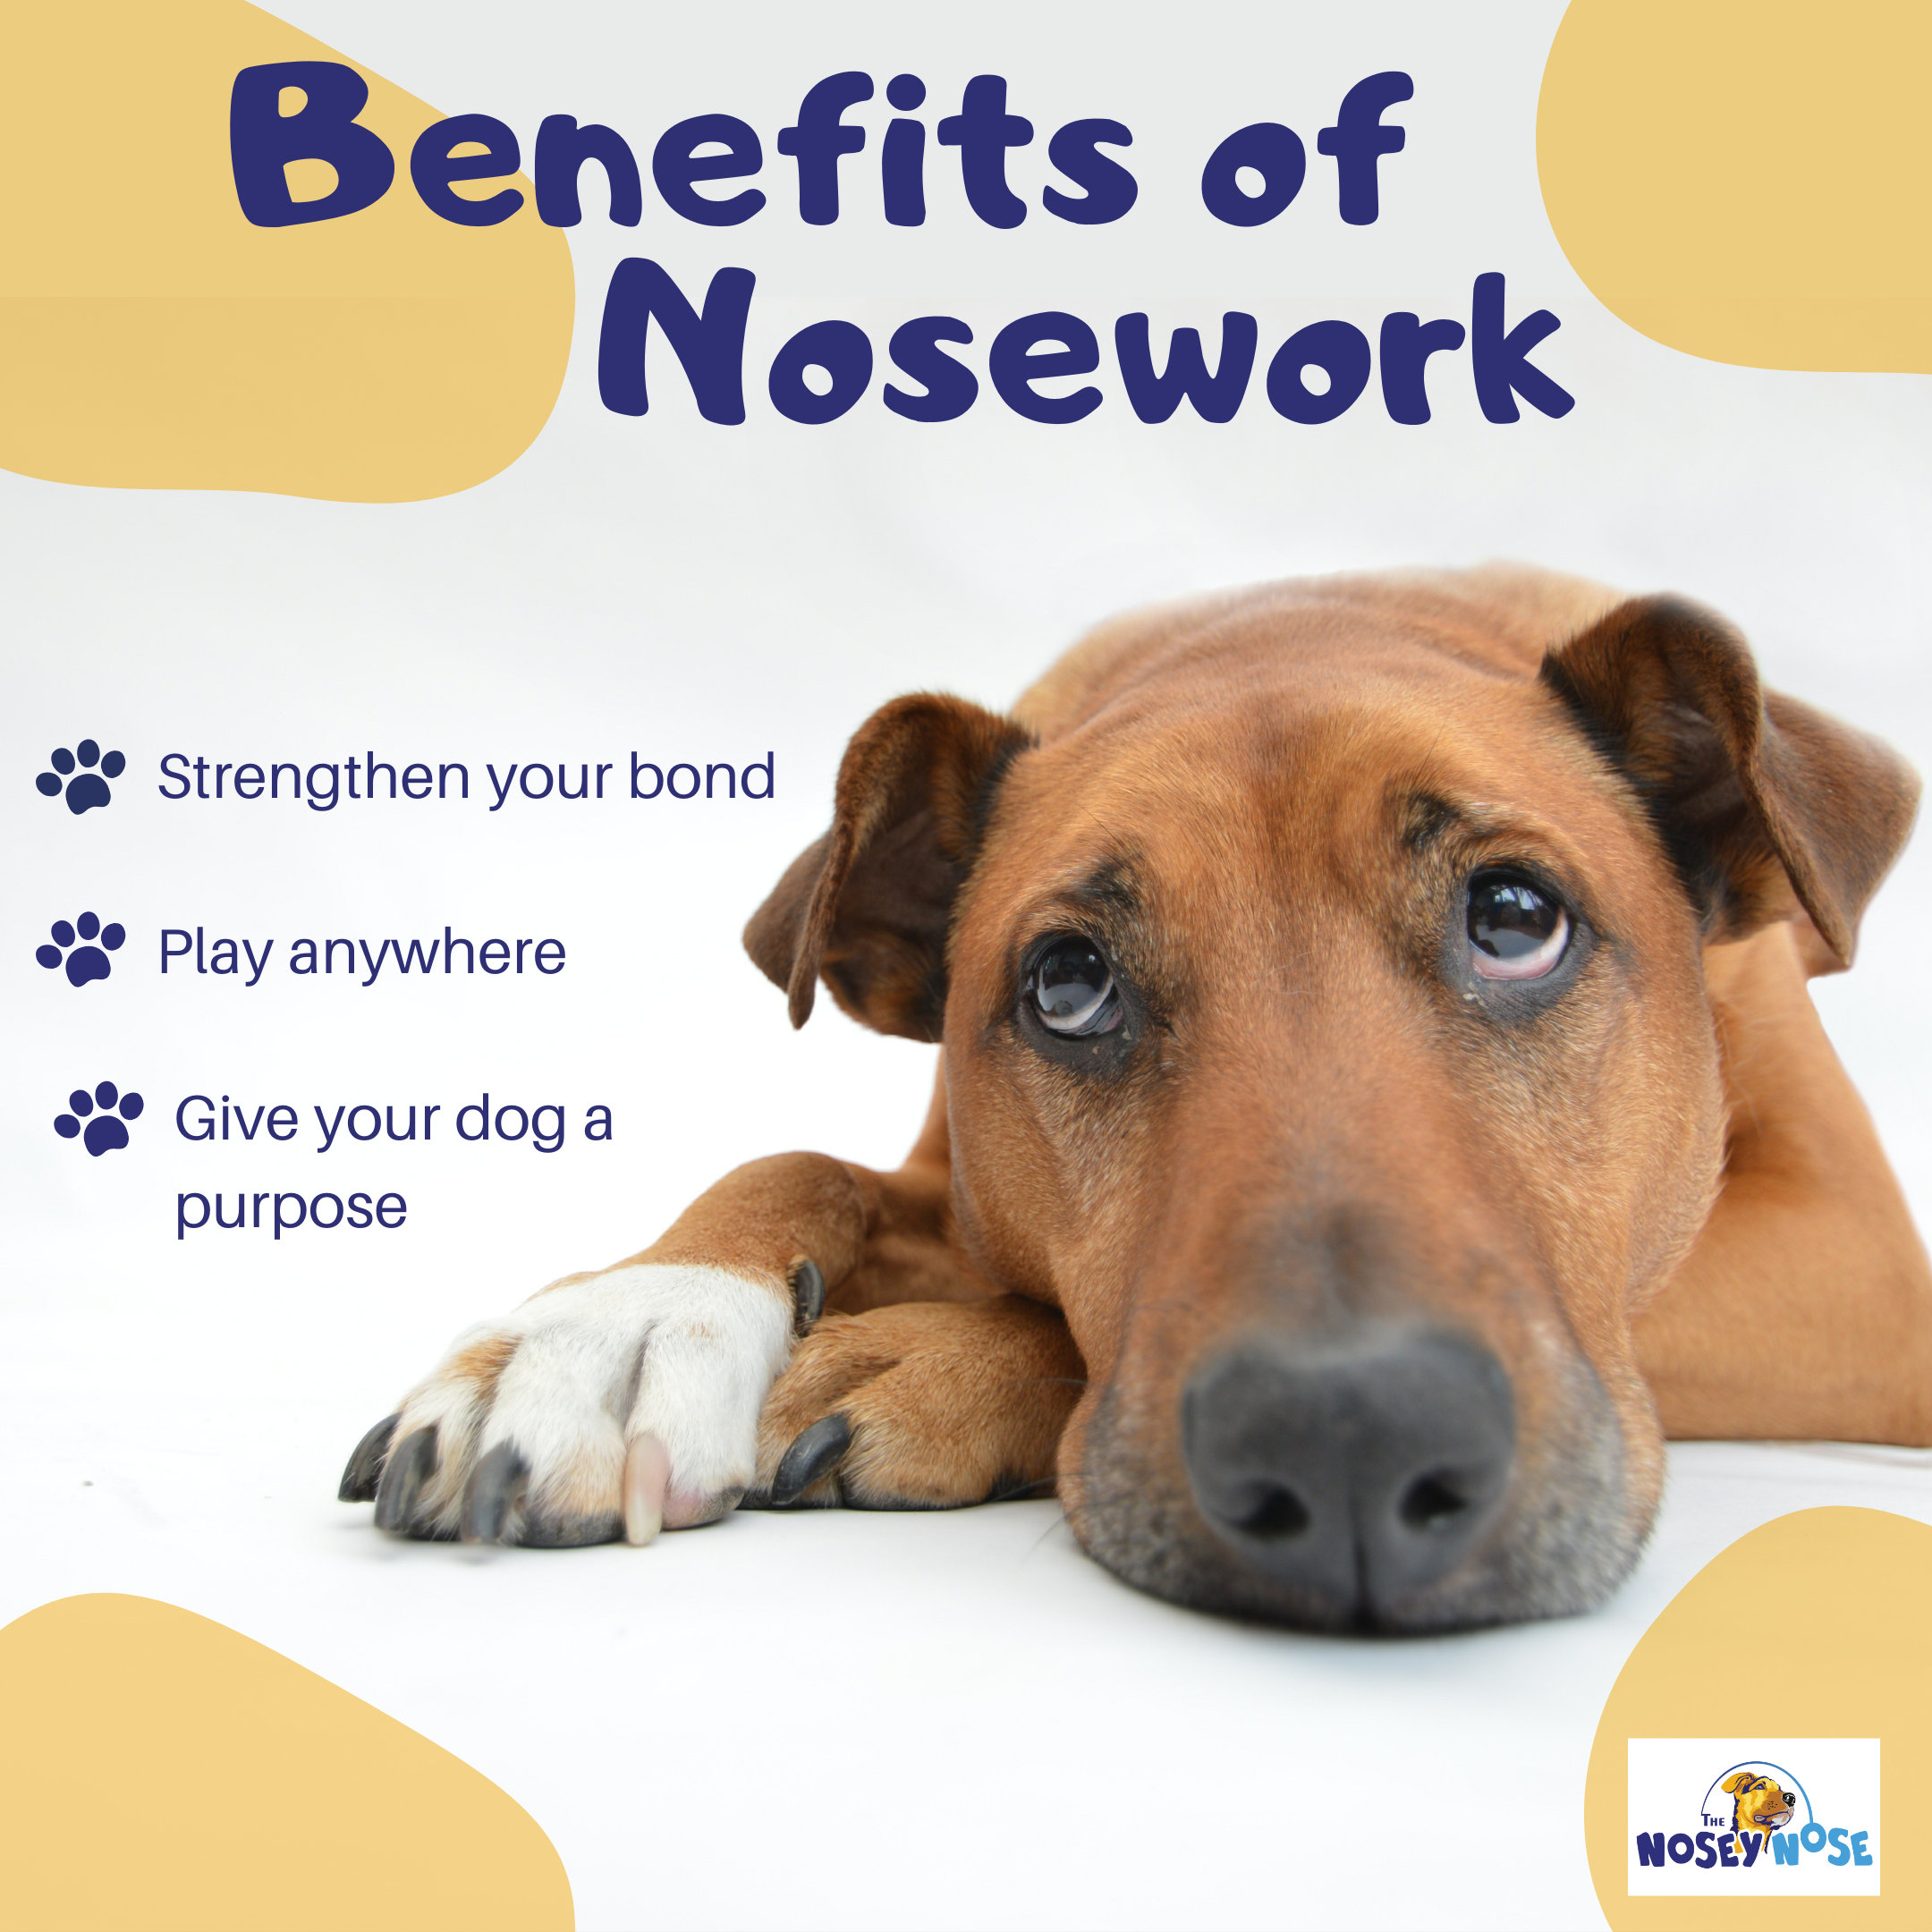 5 Nose Work for Dogs That You Must Know Right Away! – GoMine